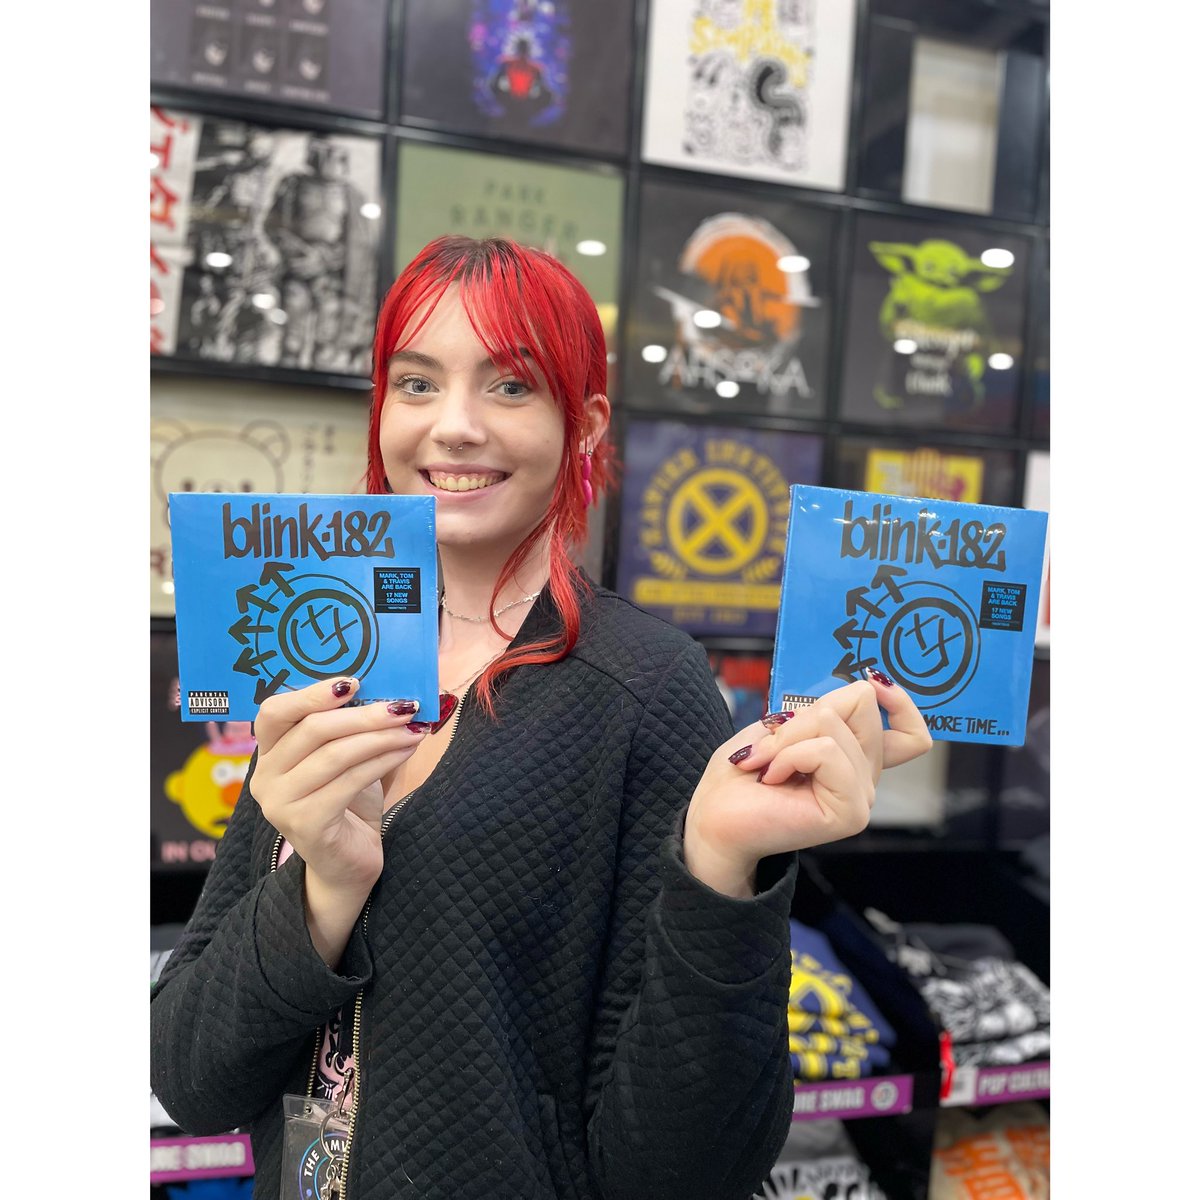 NEW BLINK?! HELL YEAH! 🤘🏻 @blink182 ‘One More Time’ is out now! 🎶 We are vibing in store right now, please no stage diving at the tills though!! 🤘🏻 #hmv #blink182 #onemoretime #blink #music 🖤🖤🖤 @blink182 🖤🖤🖤